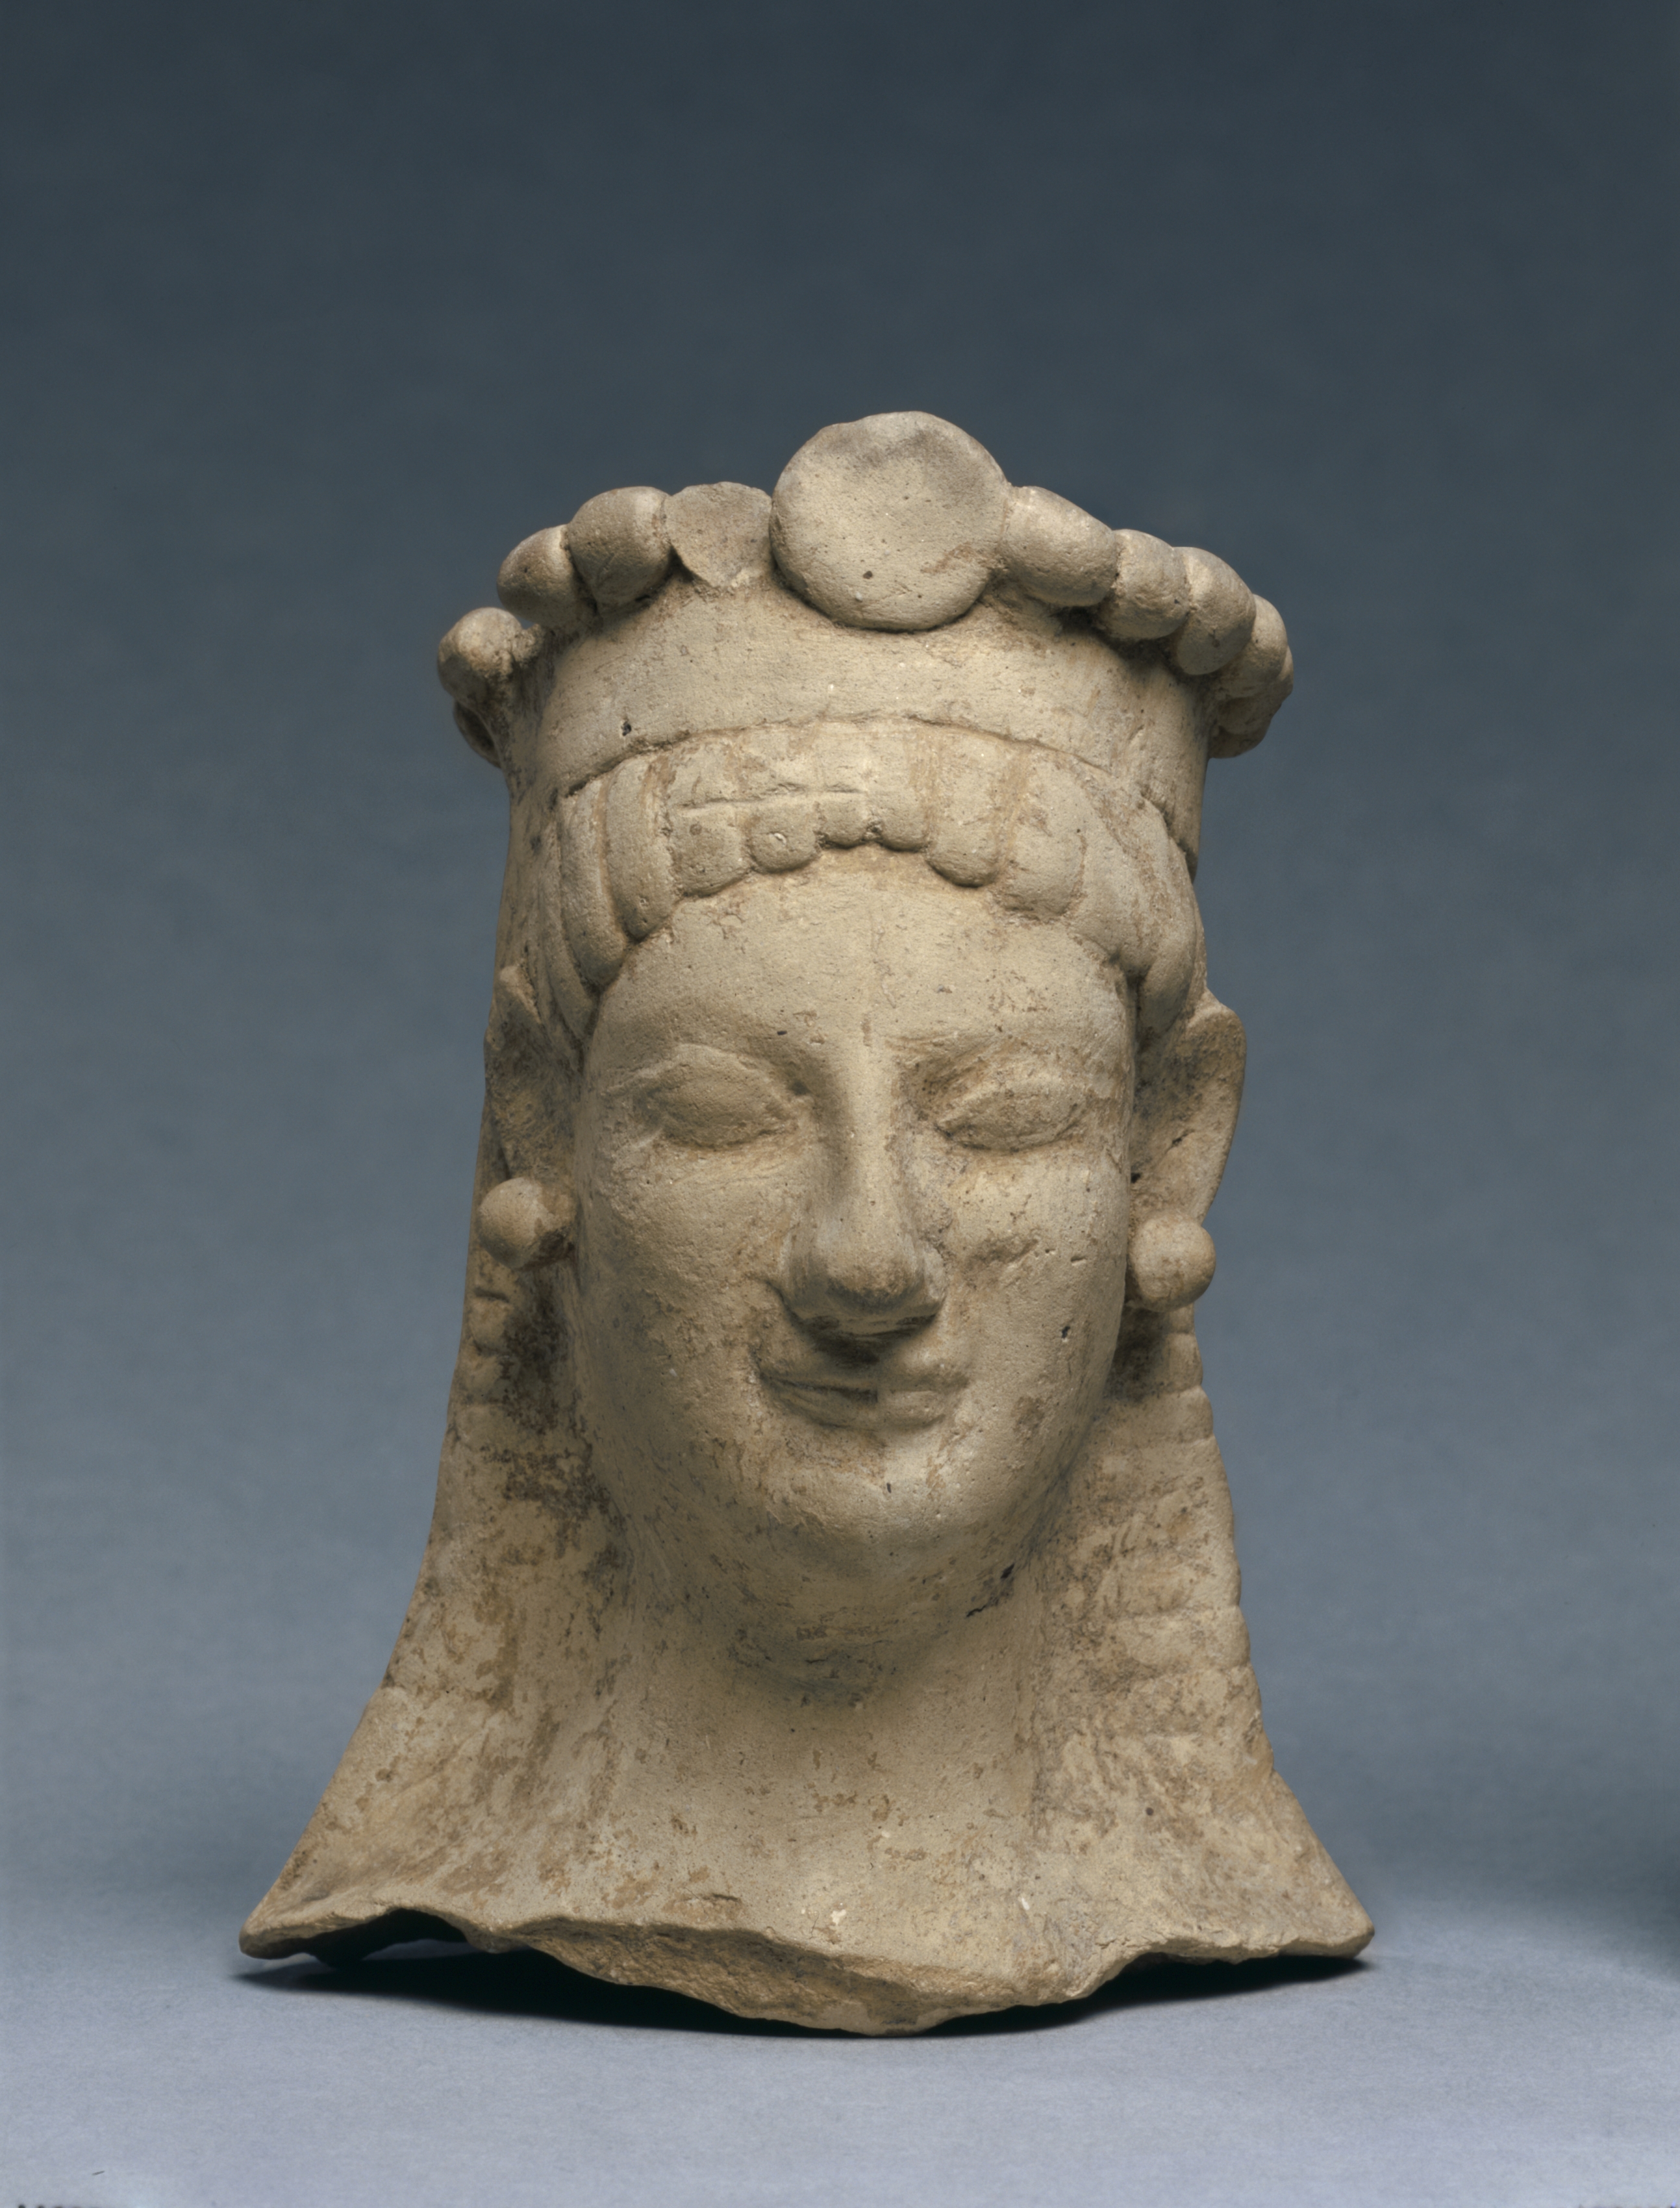 Woman's Head with Crown and Earrings